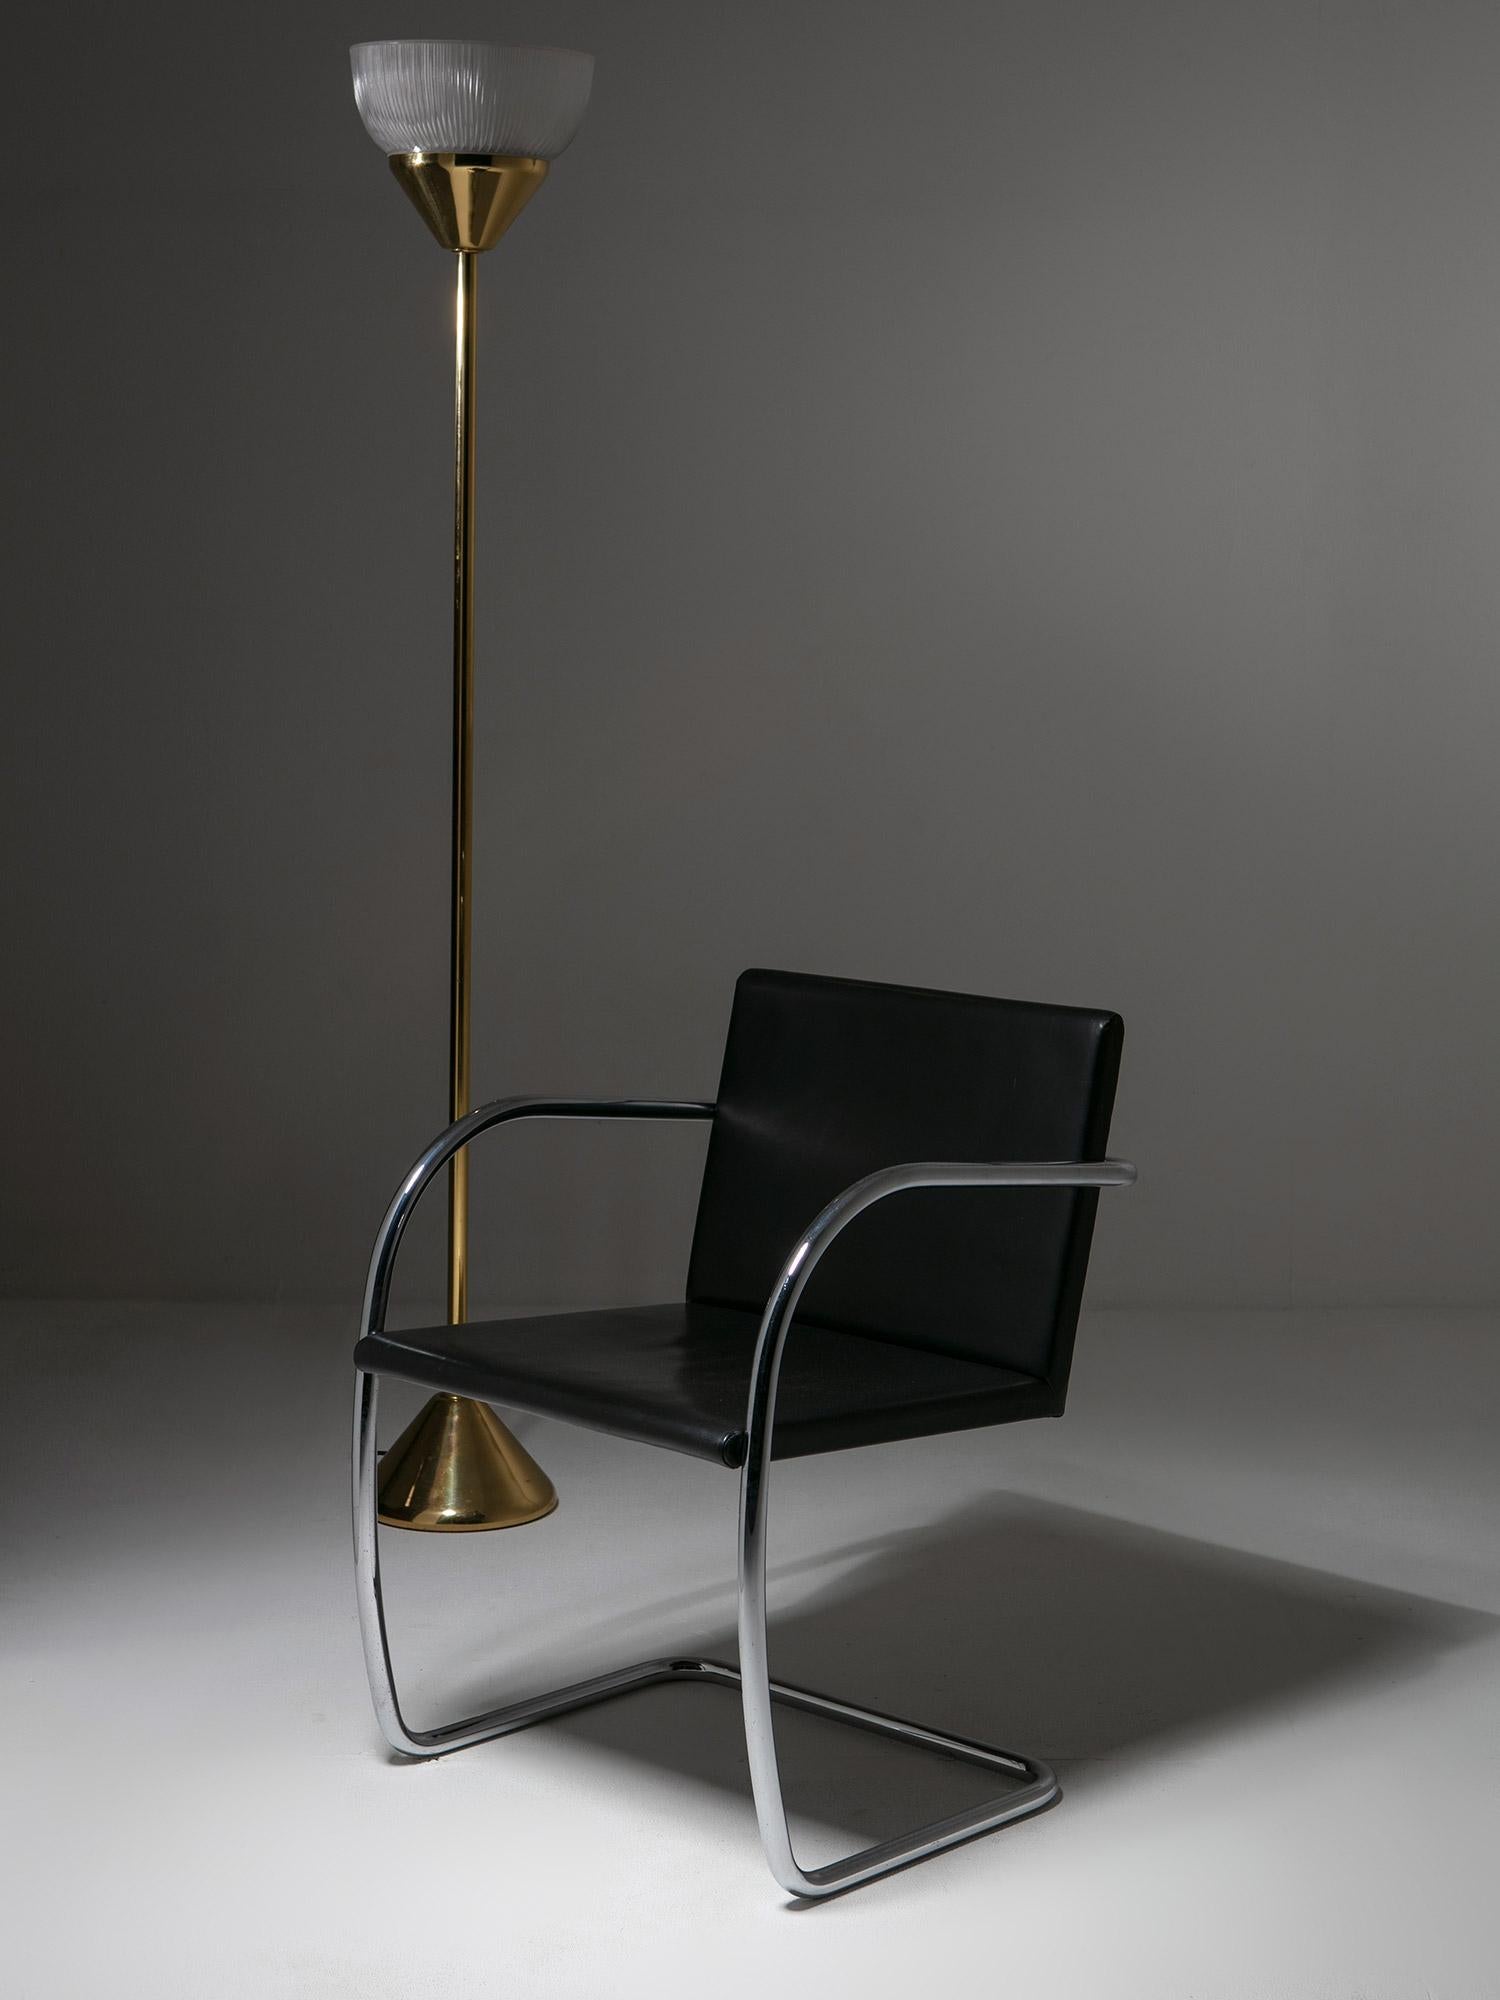 Mid-20th Century Model 245 Chrome and Leather Armchair by Mies van der Rohe for Knoll, 1960s For Sale